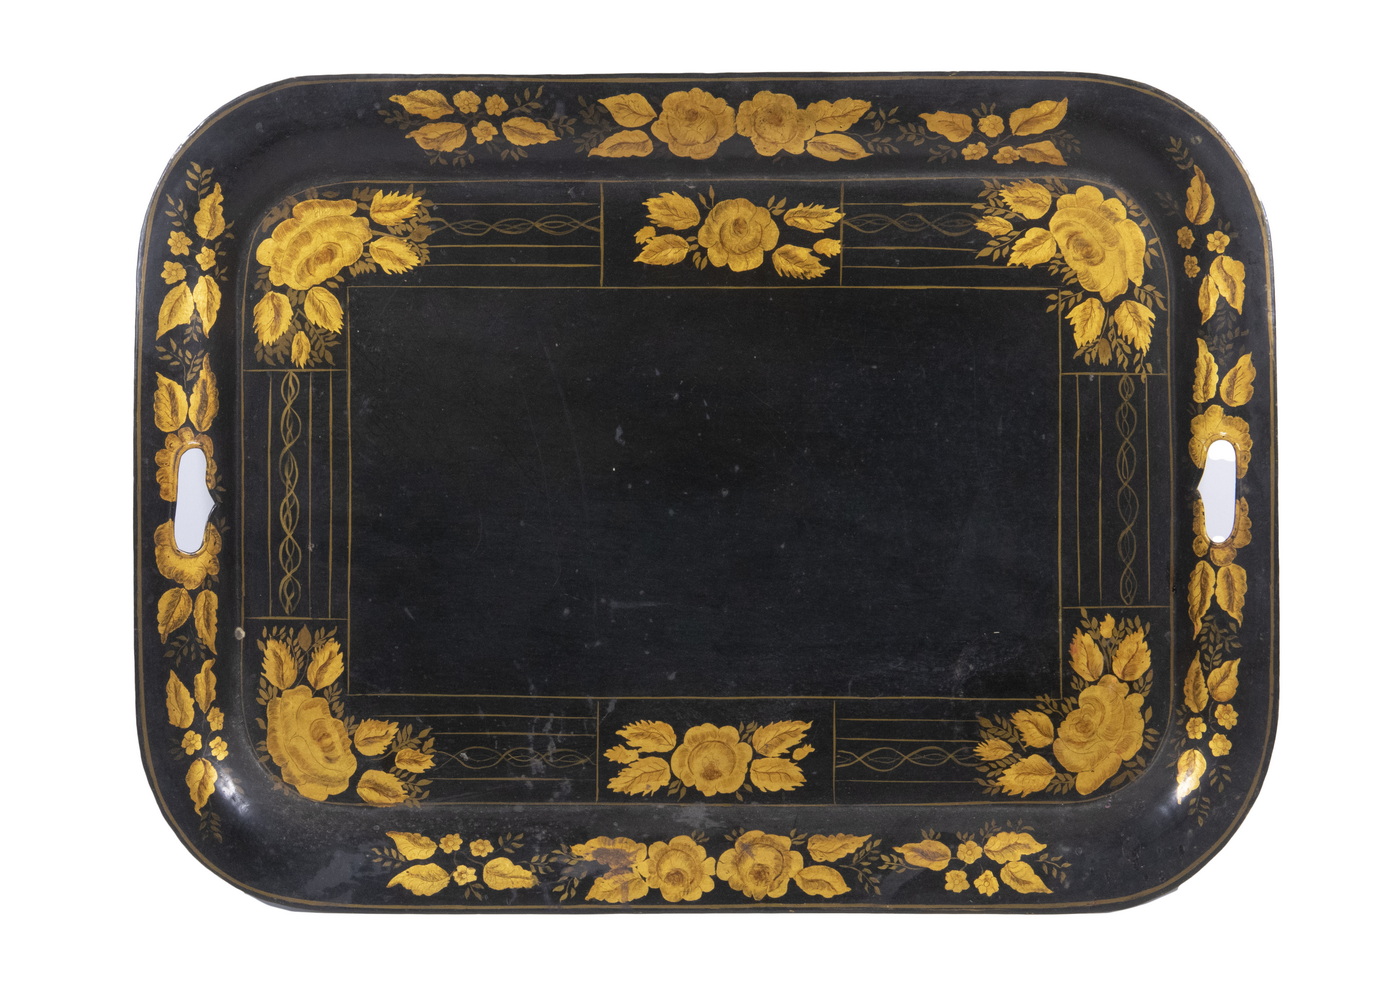 TOLE PAINTED TRAY 19th c. Rectangular